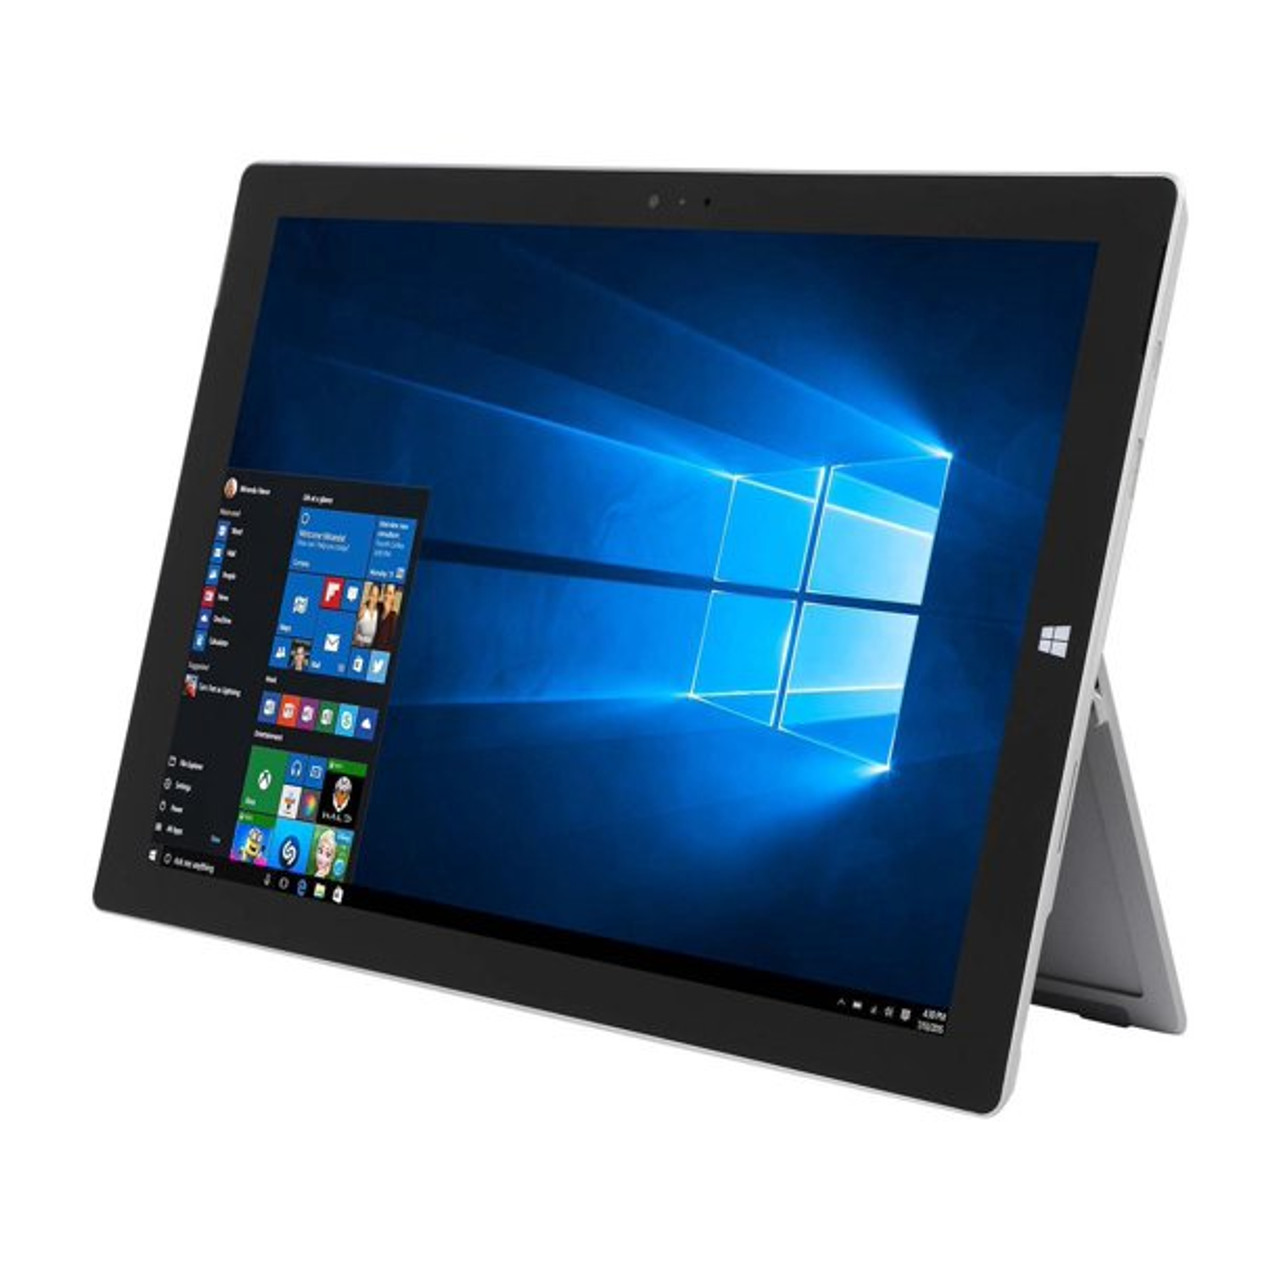 Microsoft Surface Pro 3 - Laptop / Tablet - Intel Core i5 8GB RAM 256GB SSD  Storage - Windows 10 - 12 ClearType Full HD Plus Touchscreen Display -  2160 x 1440 Resolution